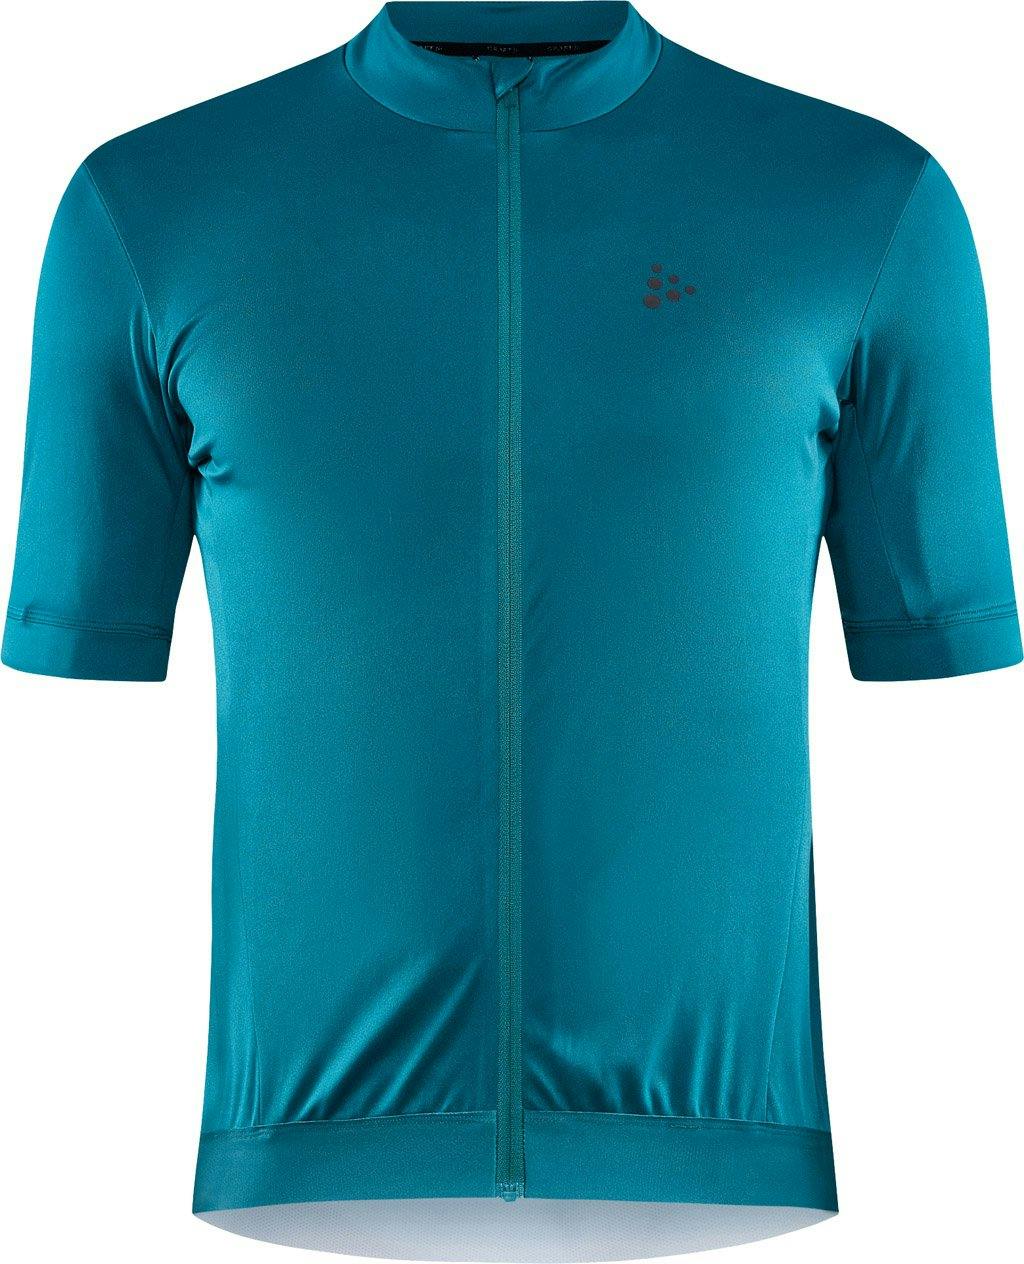 Product image for Core Essence Regular Fit Jersey - Men's